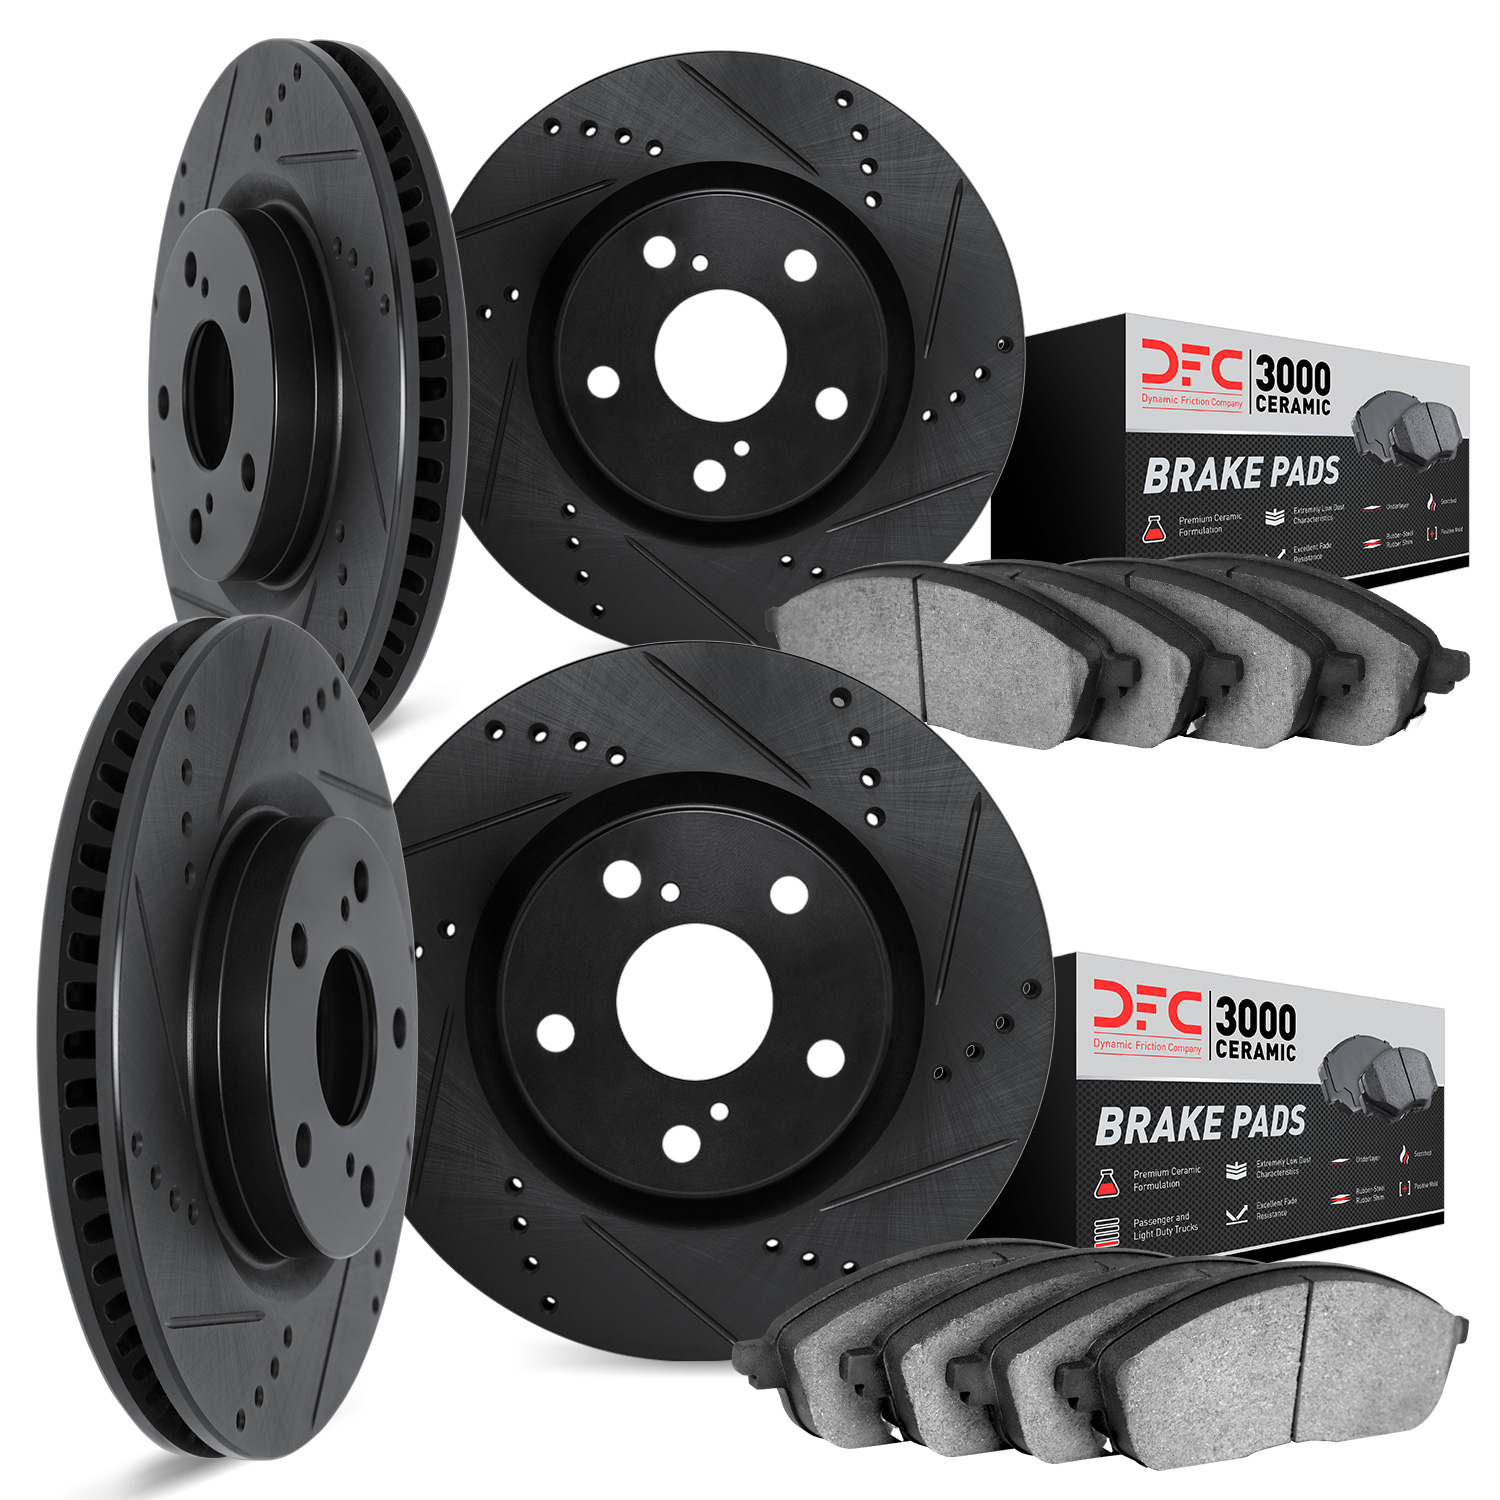 8304-31044 Drilled/Slotted Brake Rotors with 3000-Series Ceramic Brake Pads Kit [Black], 1995-2001 BMW, Position: Front and Rear